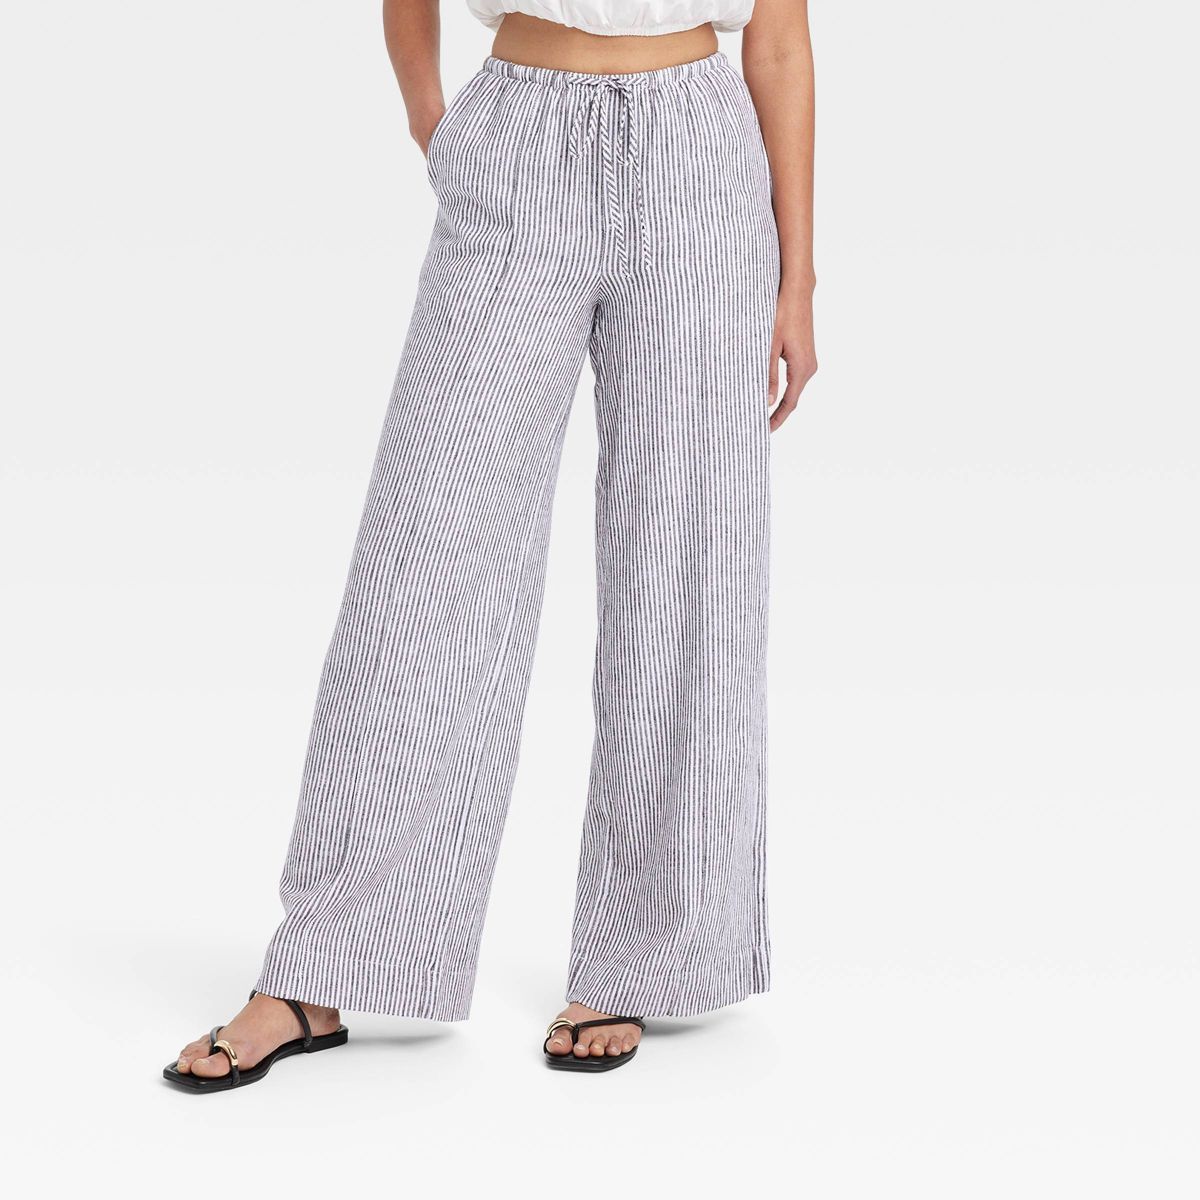 Women's High-Rise Wide Leg Linen Pull-On Pants - A New Day™ Black/White Striped XL | Target